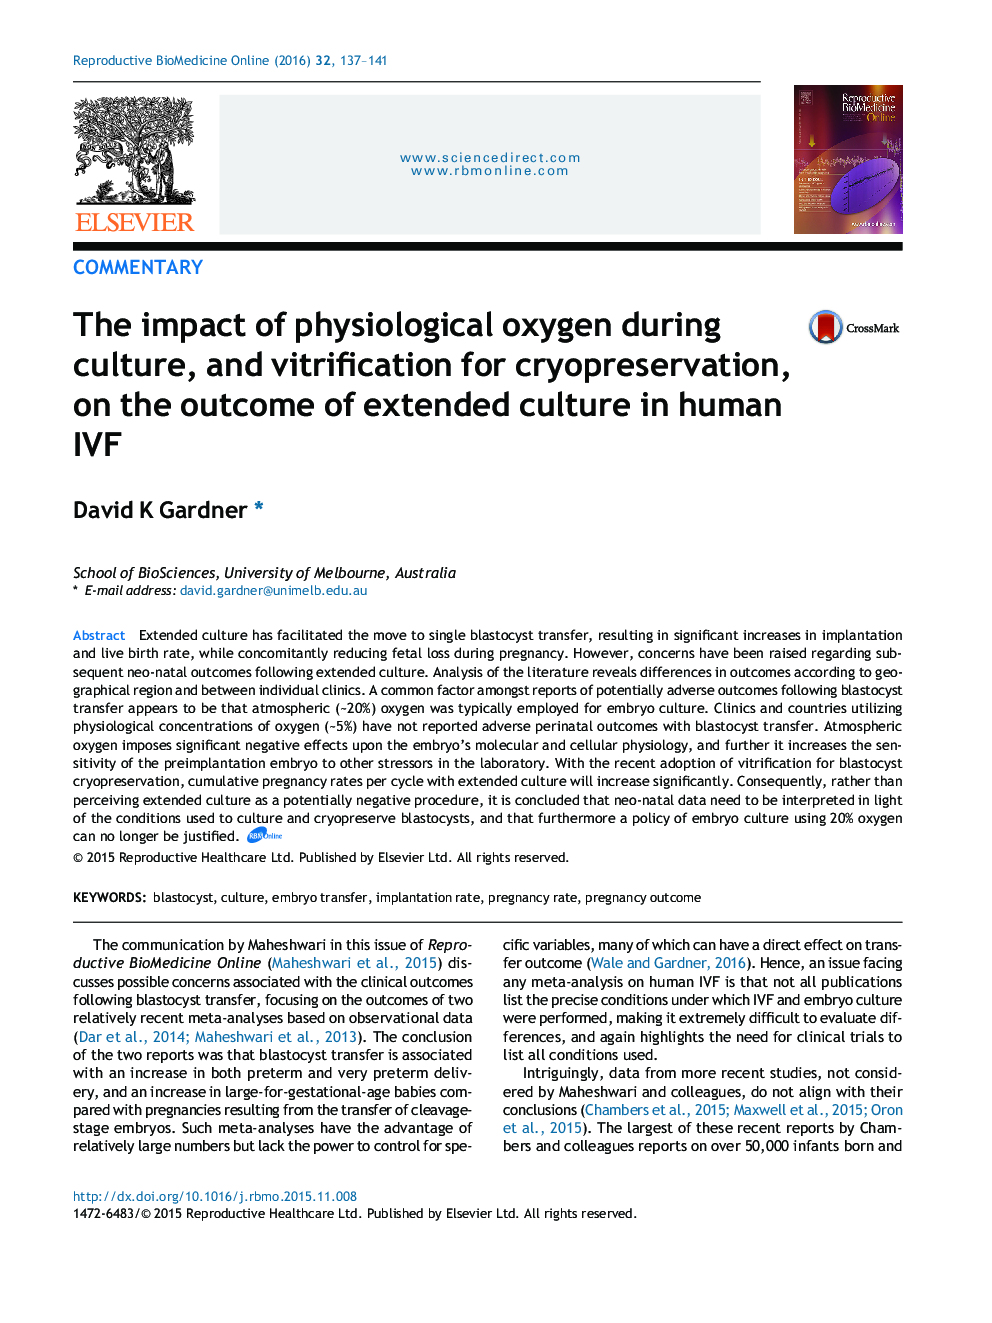 CommentaryThe impact of physiological oxygen during culture, and vitrification for cryopreservation, on the outcome of extended culture in human IVF